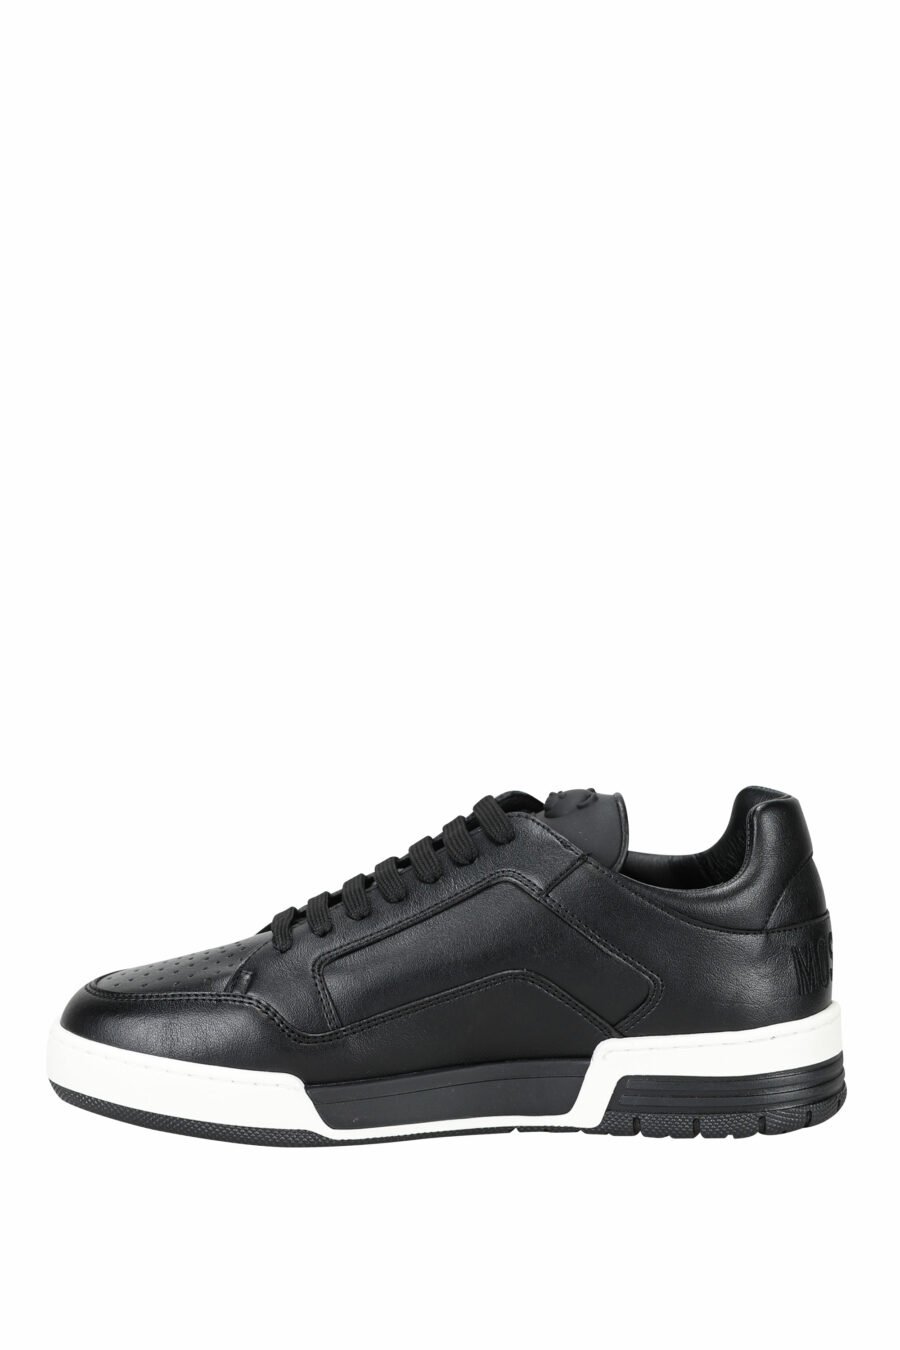 Black leather trainers with white sole and logo - 8054653096394 2